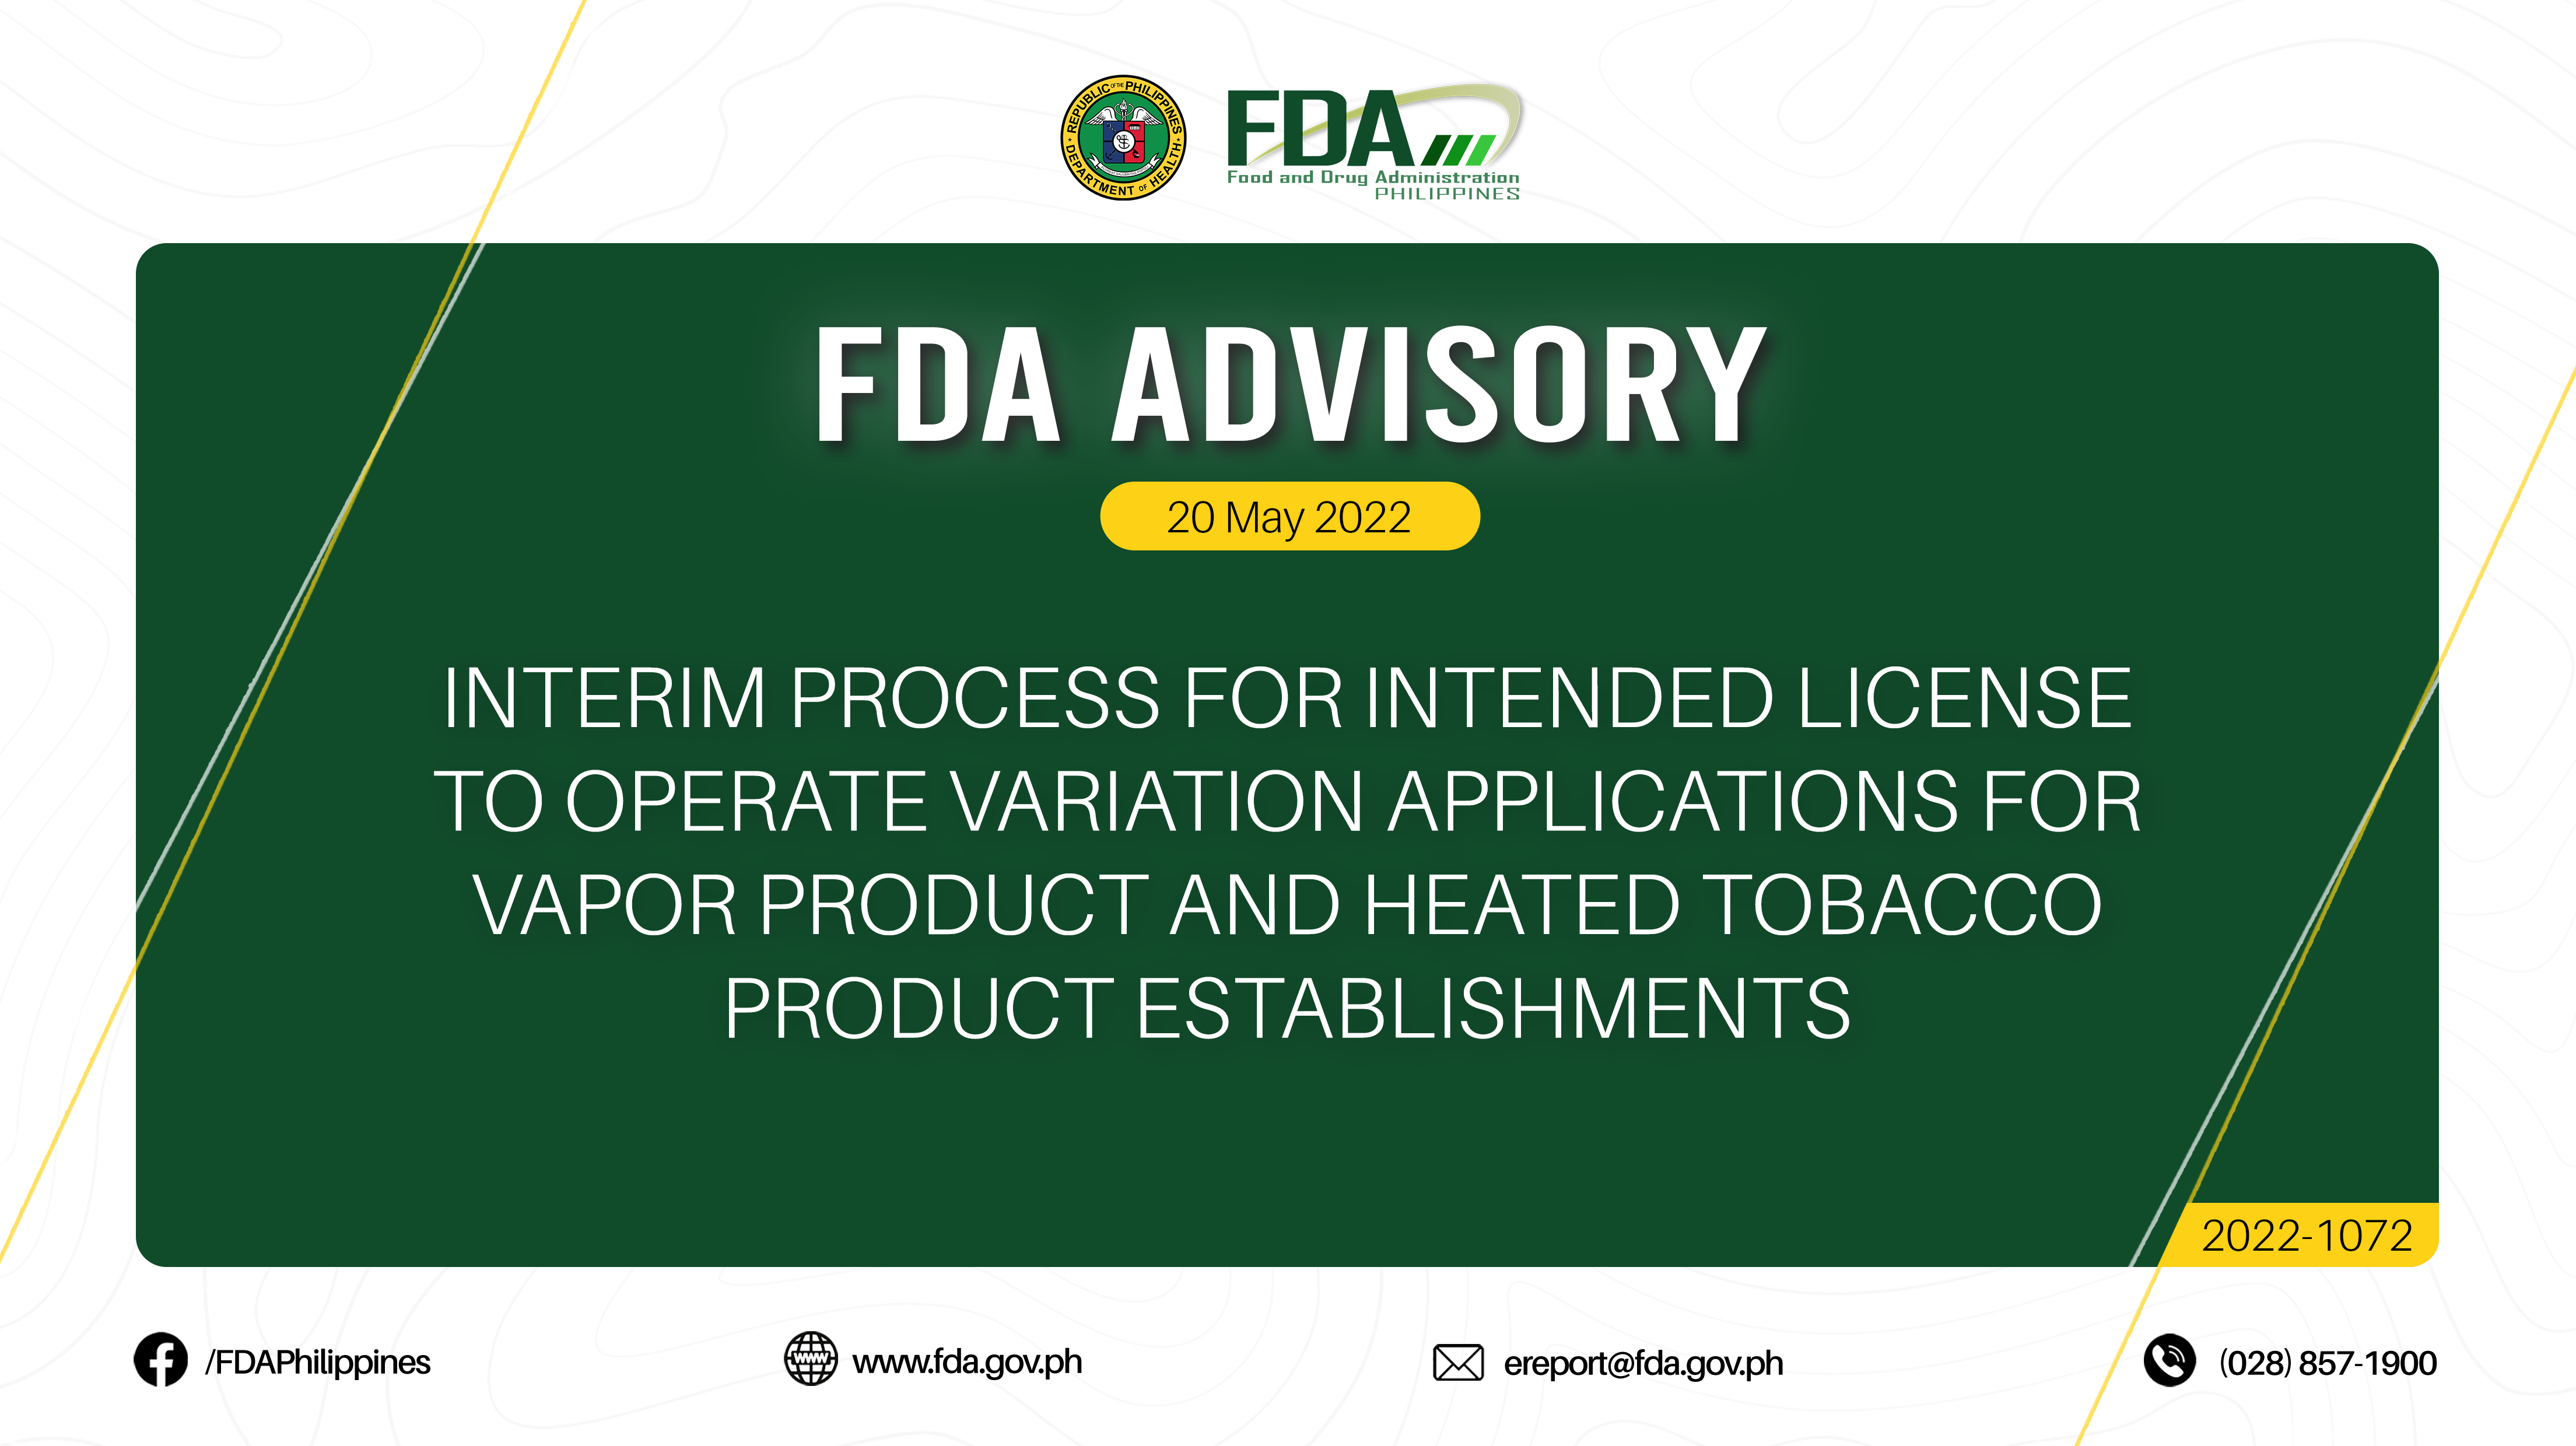 FDA Advisory No.2022-1072 || INTERIM PROCESS FOR INTENDED LICENSE TO OPERATE VARIATION APPLICATIONS FOR VAPOR PRODUC T AND HEATED TOBACCO PRODUCT ESTABLISHMENTS